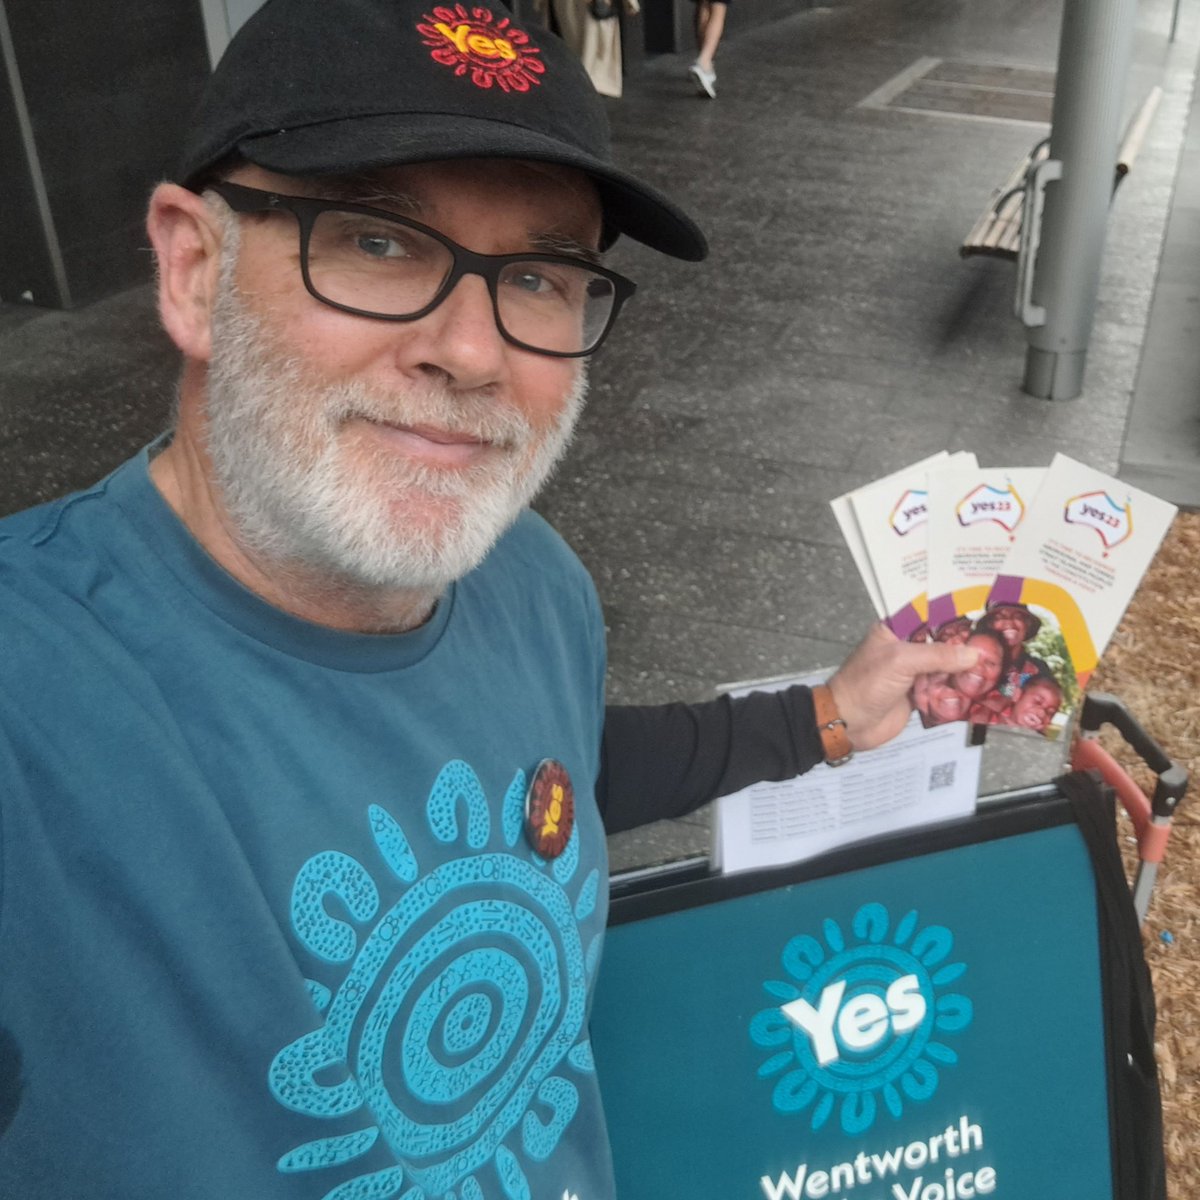 In #BondiJunction this morning, an elderly gentleman told me he was a lifelong LNP voter and had planned to vote no. But he'd changed to #VoteYes after a conversation with his son, who explained why the #VoiceToParliament needs to be enshrined in the #Constitution. ❤️